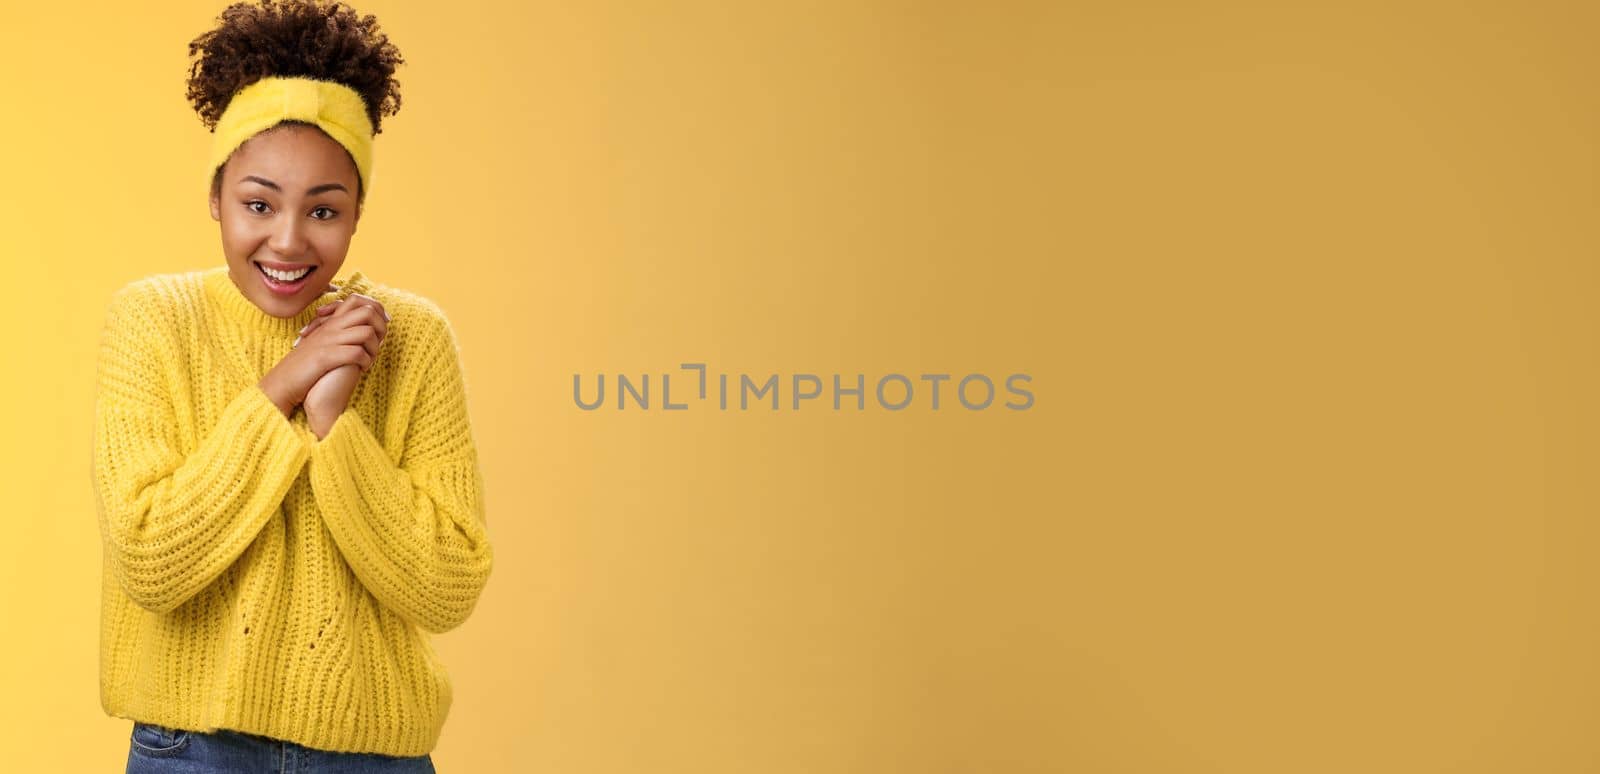 Touched tender african-american woman press palms together sighing happily smiling enjoying lovely scene grinning look passionate delighted grateful have united supportive family, yellow background.